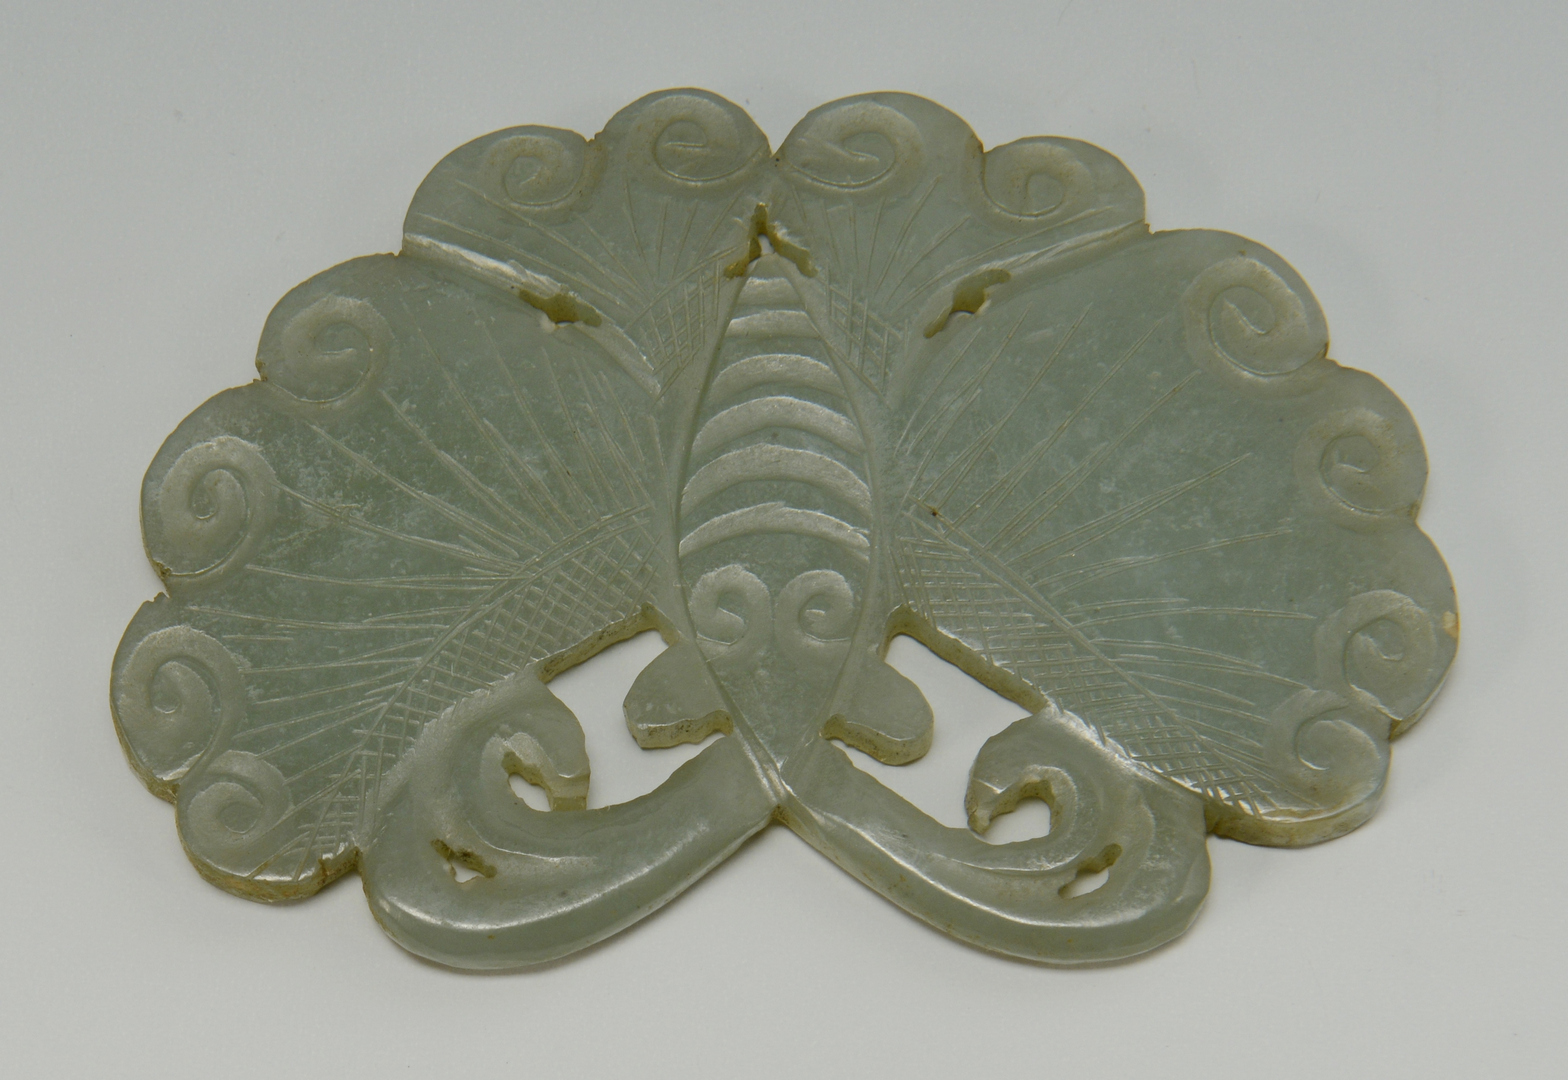 Lot 3088269: 3 Carved Chinese Jade Plaques